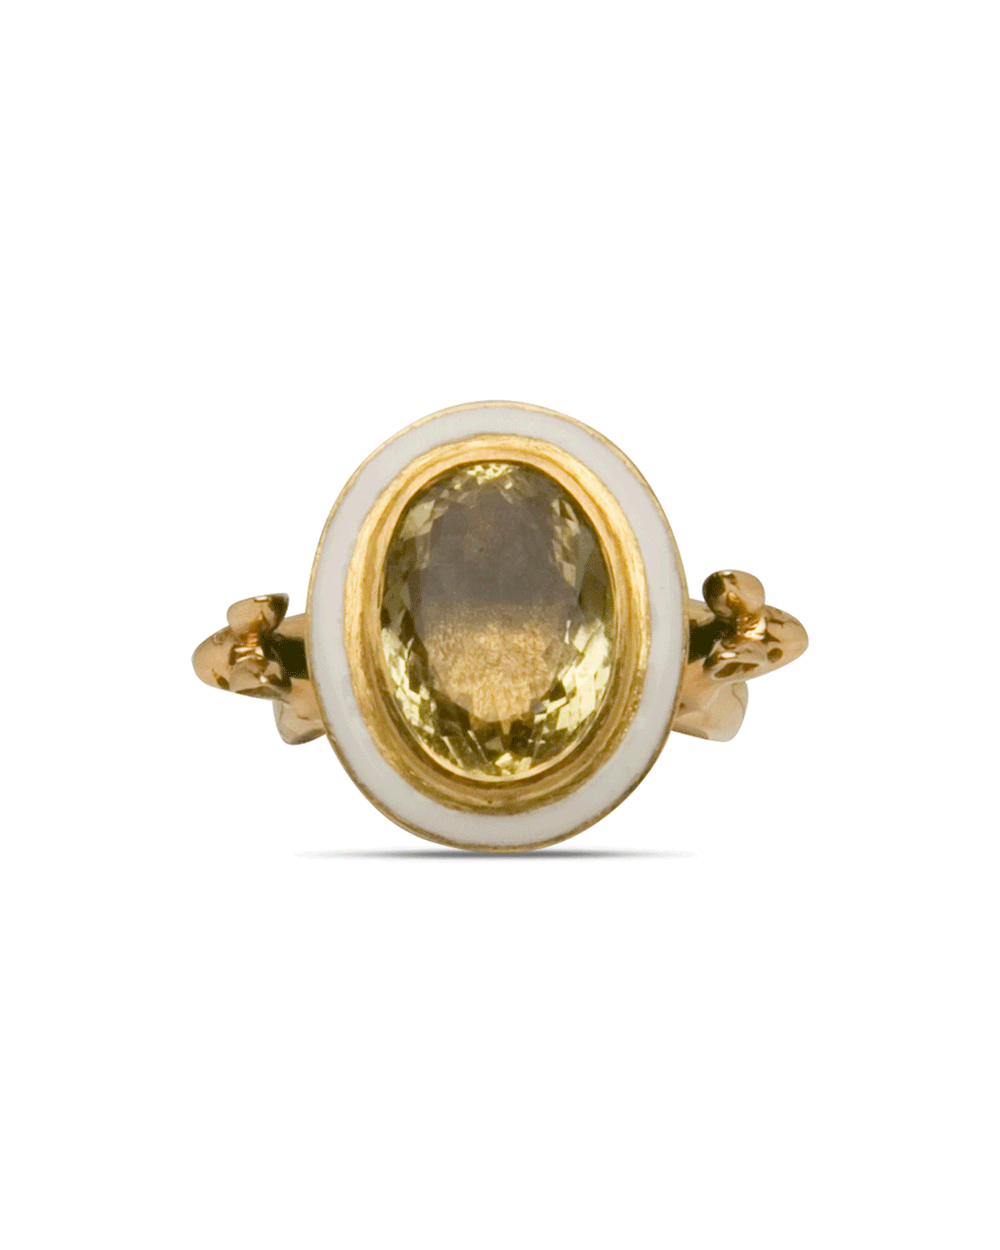 20k Yellow Gold Imperial Rabbit Ring